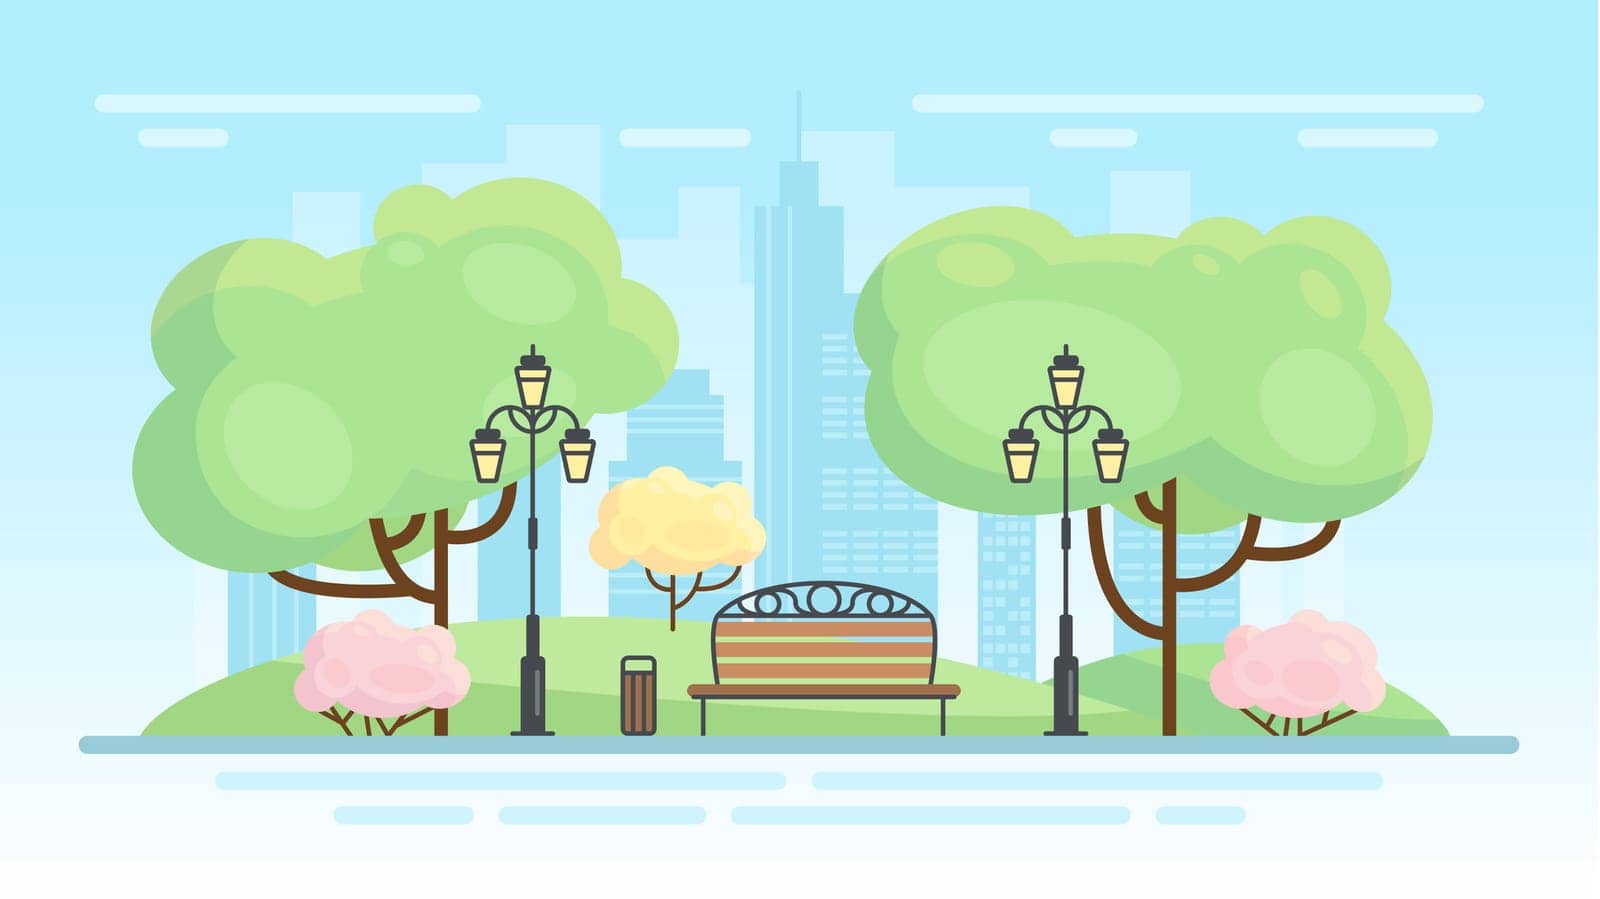 City park landscape in spring vector illustration. Cartoon sunny cityscape scene with downtown public garden for recreation, wood bench and streetlight under green trees, skyline with skyscrapers